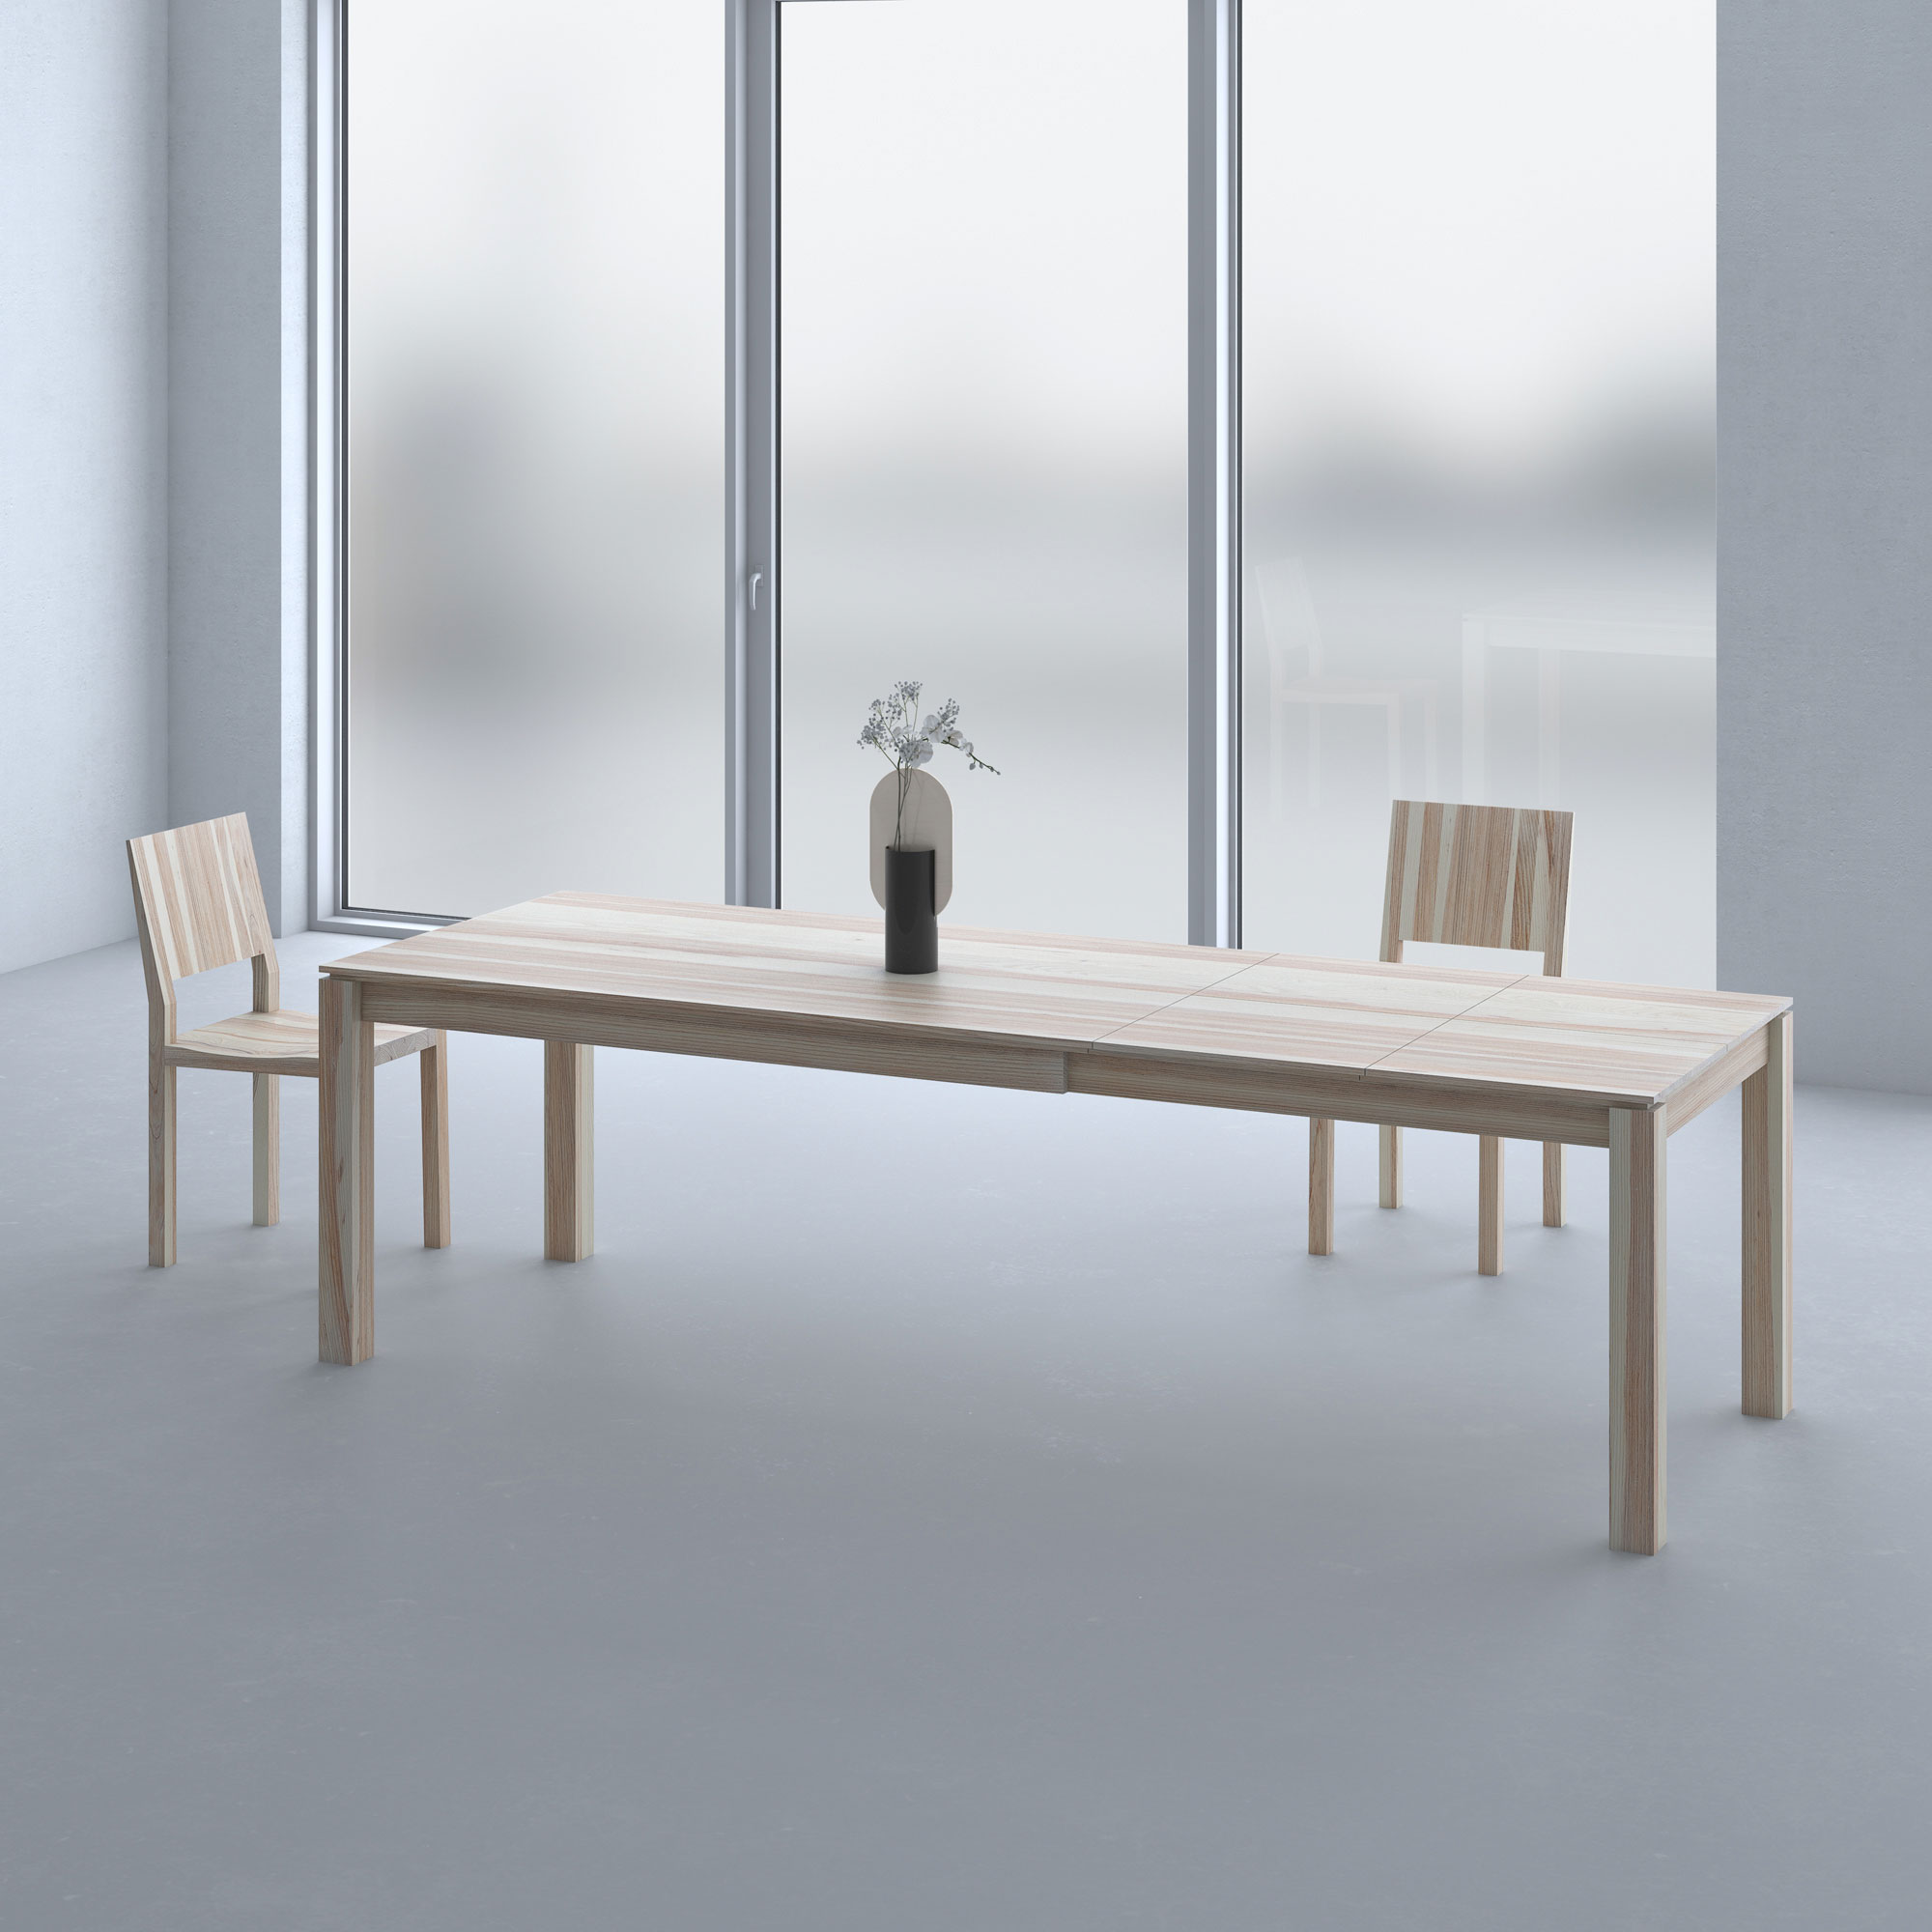 Extending Dining Table CONVERTO BUTTERFLY cam1 custom made in solid wood by vitamin design